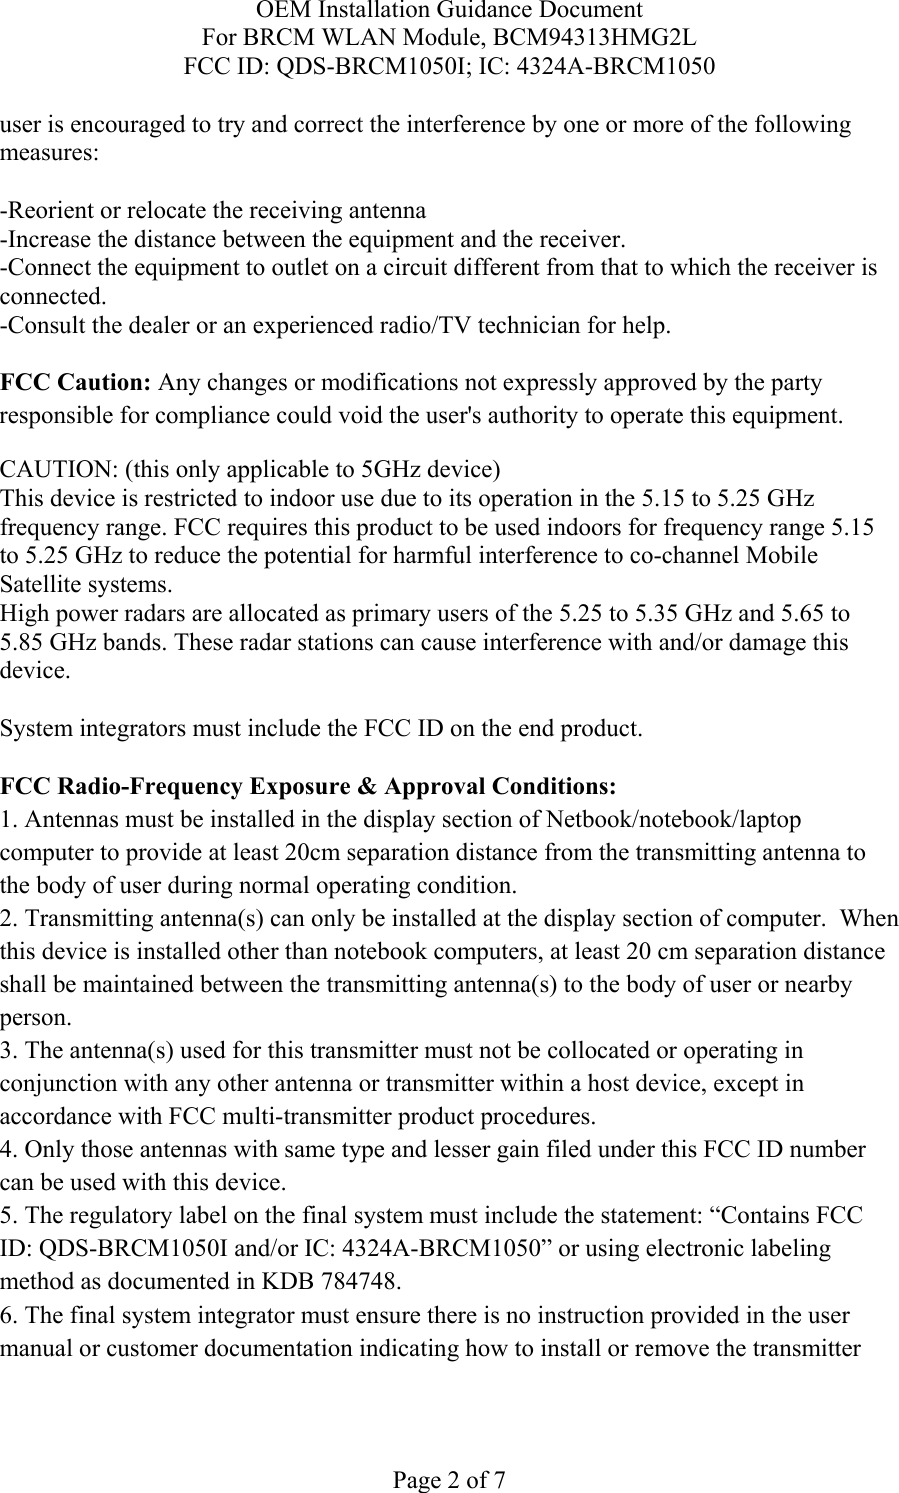 OEM Installation Guidance Document For BRCM WLAN Module, BCM94313HMG2L FCC ID: QDS-BRCM1050I; IC: 4324A-BRCM1050  Page 2 of 7 user is encouraged to try and correct the interference by one or more of the following measures:   -Reorient or relocate the receiving antenna -Increase the distance between the equipment and the receiver. -Connect the equipment to outlet on a circuit different from that to which the receiver is connected. -Consult the dealer or an experienced radio/TV technician for help.  FCC Caution: Any changes or modifications not expressly approved by the party responsible for compliance could void the user&apos;s authority to operate this equipment. CAUTION: (this only applicable to 5GHz device) This device is restricted to indoor use due to its operation in the 5.15 to 5.25 GHz frequency range. FCC requires this product to be used indoors for frequency range 5.15 to 5.25 GHz to reduce the potential for harmful interference to co-channel Mobile Satellite systems. High power radars are allocated as primary users of the 5.25 to 5.35 GHz and 5.65 to 5.85 GHz bands. These radar stations can cause interference with and/or damage this device.  System integrators must include the FCC ID on the end product.   FCC Radio-Frequency Exposure &amp; Approval Conditions: 1. Antennas must be installed in the display section of Netbook/notebook/laptop computer to provide at least 20cm separation distance from the transmitting antenna to the body of user during normal operating condition. 2. Transmitting antenna(s) can only be installed at the display section of computer.  When this device is installed other than notebook computers, at least 20 cm separation distance shall be maintained between the transmitting antenna(s) to the body of user or nearby person. 3. The antenna(s) used for this transmitter must not be collocated or operating in conjunction with any other antenna or transmitter within a host device, except in accordance with FCC multi-transmitter product procedures. 4. Only those antennas with same type and lesser gain filed under this FCC ID number can be used with this device. 5. The regulatory label on the final system must include the statement: “Contains FCC ID: QDS-BRCM1050I and/or IC: 4324A-BRCM1050” or using electronic labeling method as documented in KDB 784748. 6. The final system integrator must ensure there is no instruction provided in the user manual or customer documentation indicating how to install or remove the transmitter 